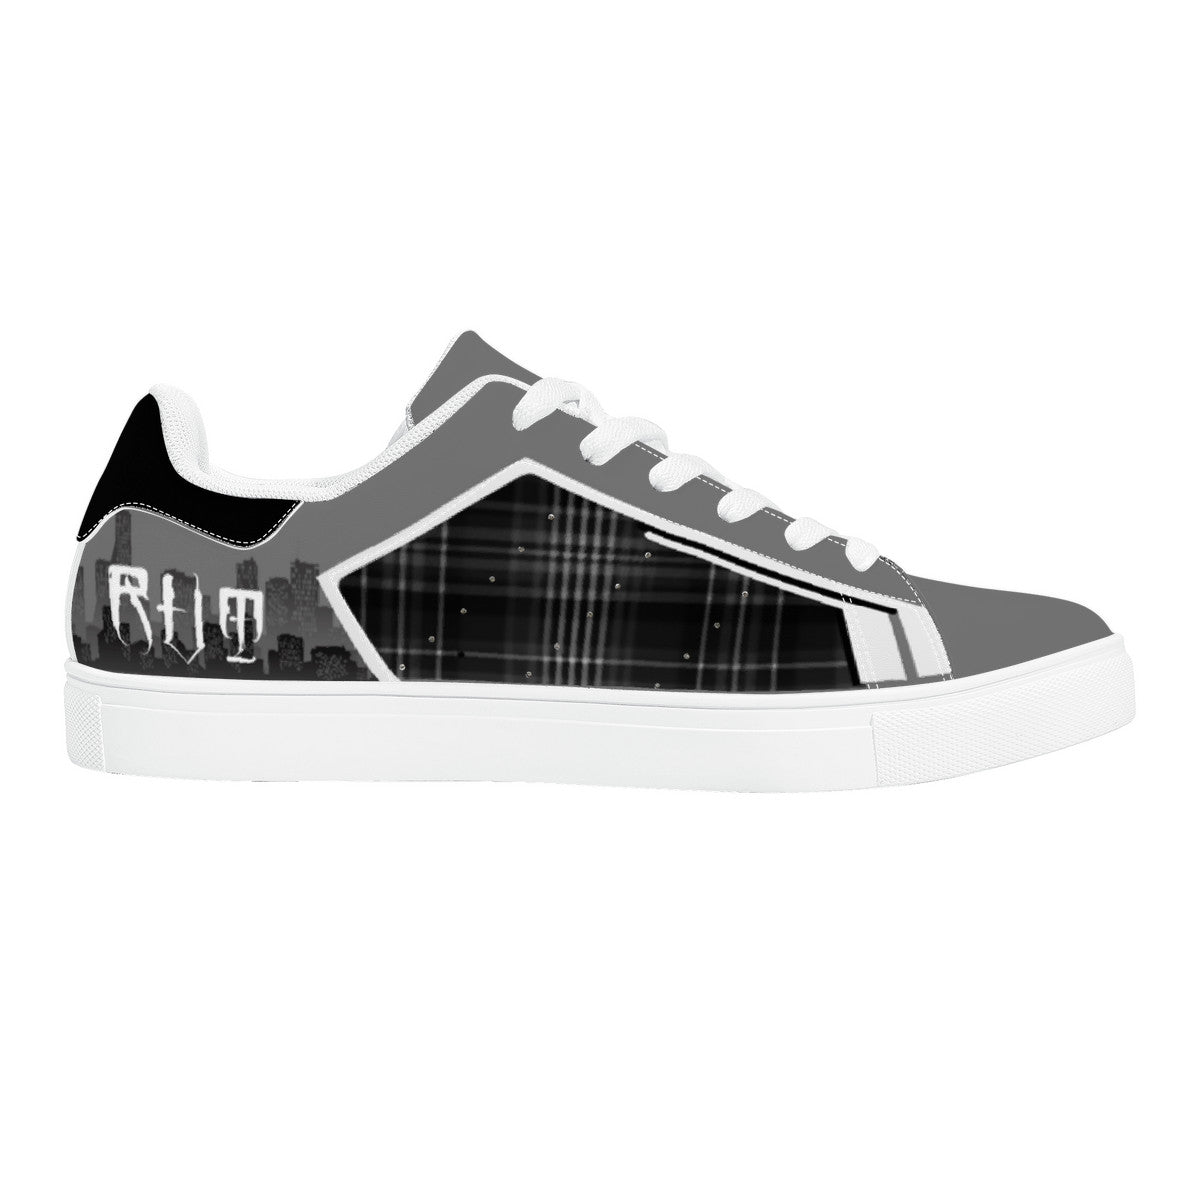 RVT Low-Top Synthetic Leather Sneakers - Skyline Plaid